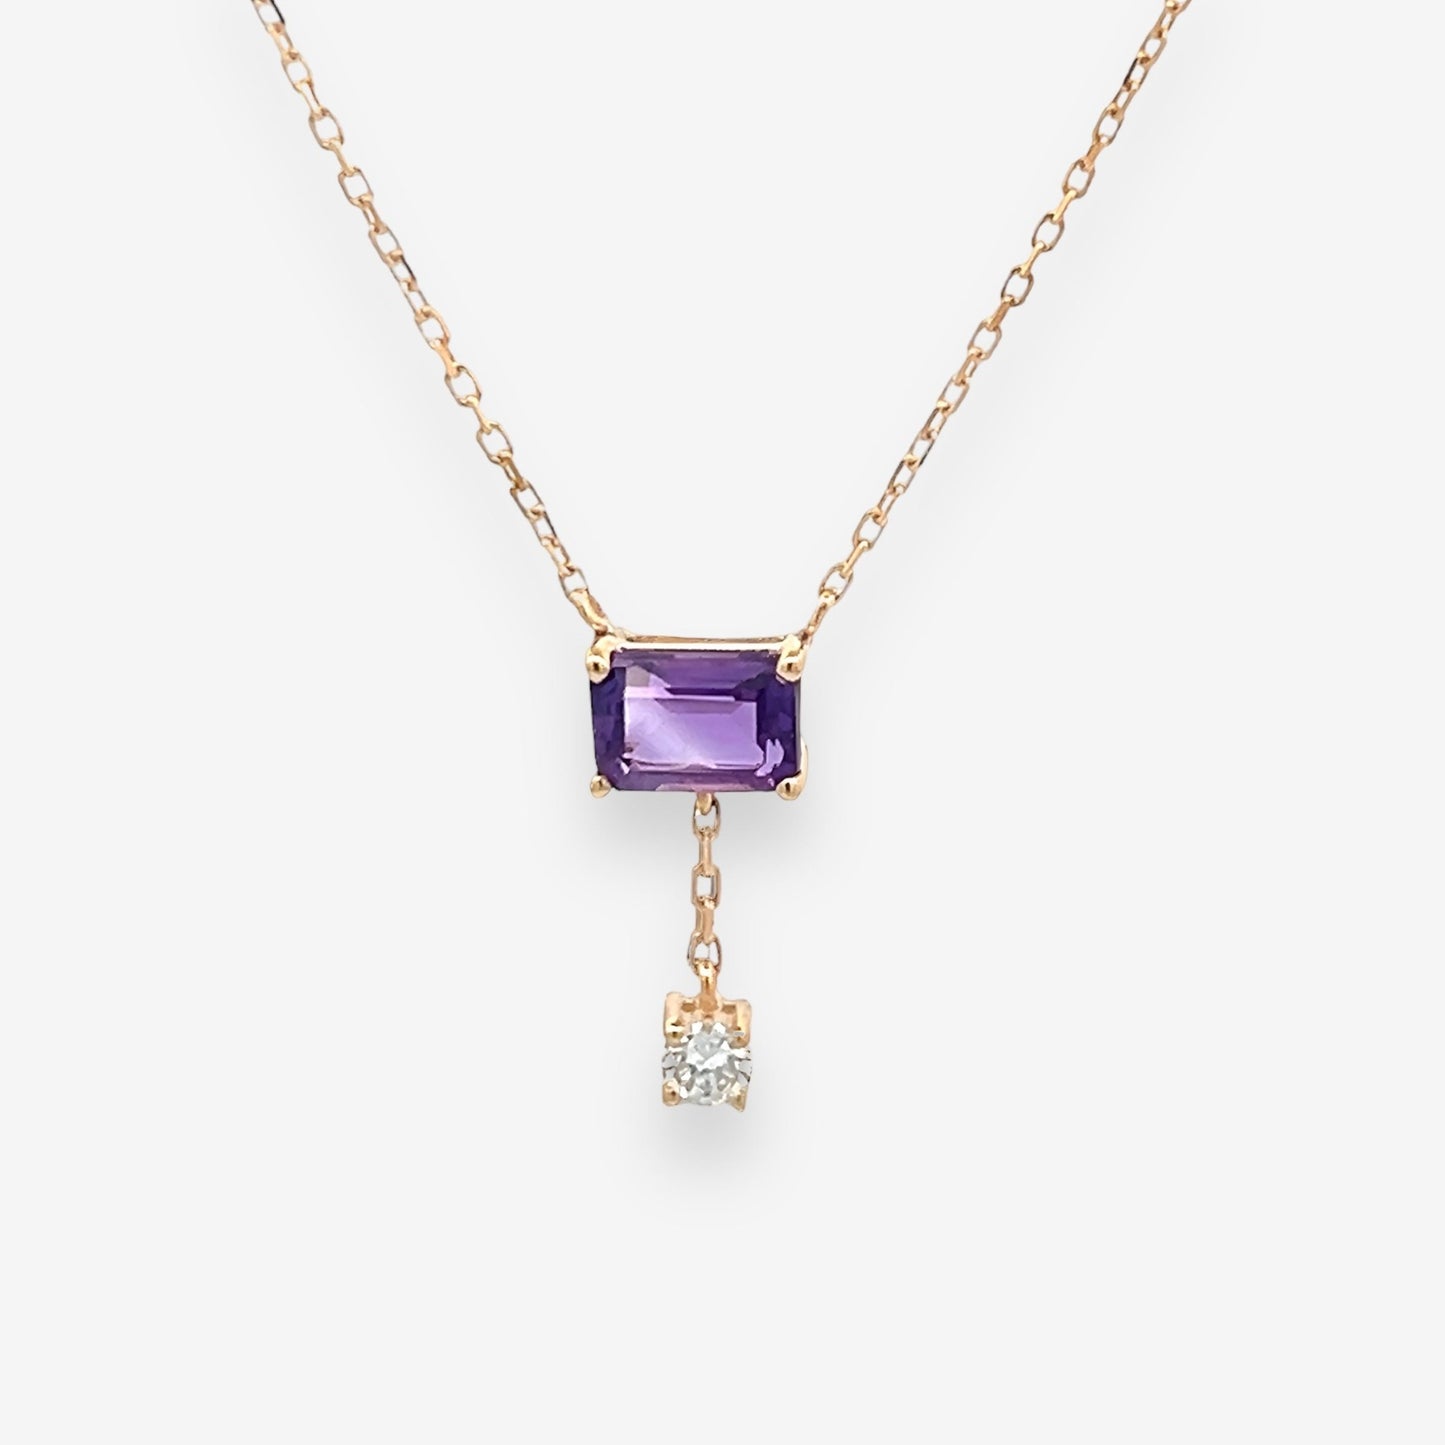 Noel Necklace in Diamond and Sapphire - 18k Gold - Lynor